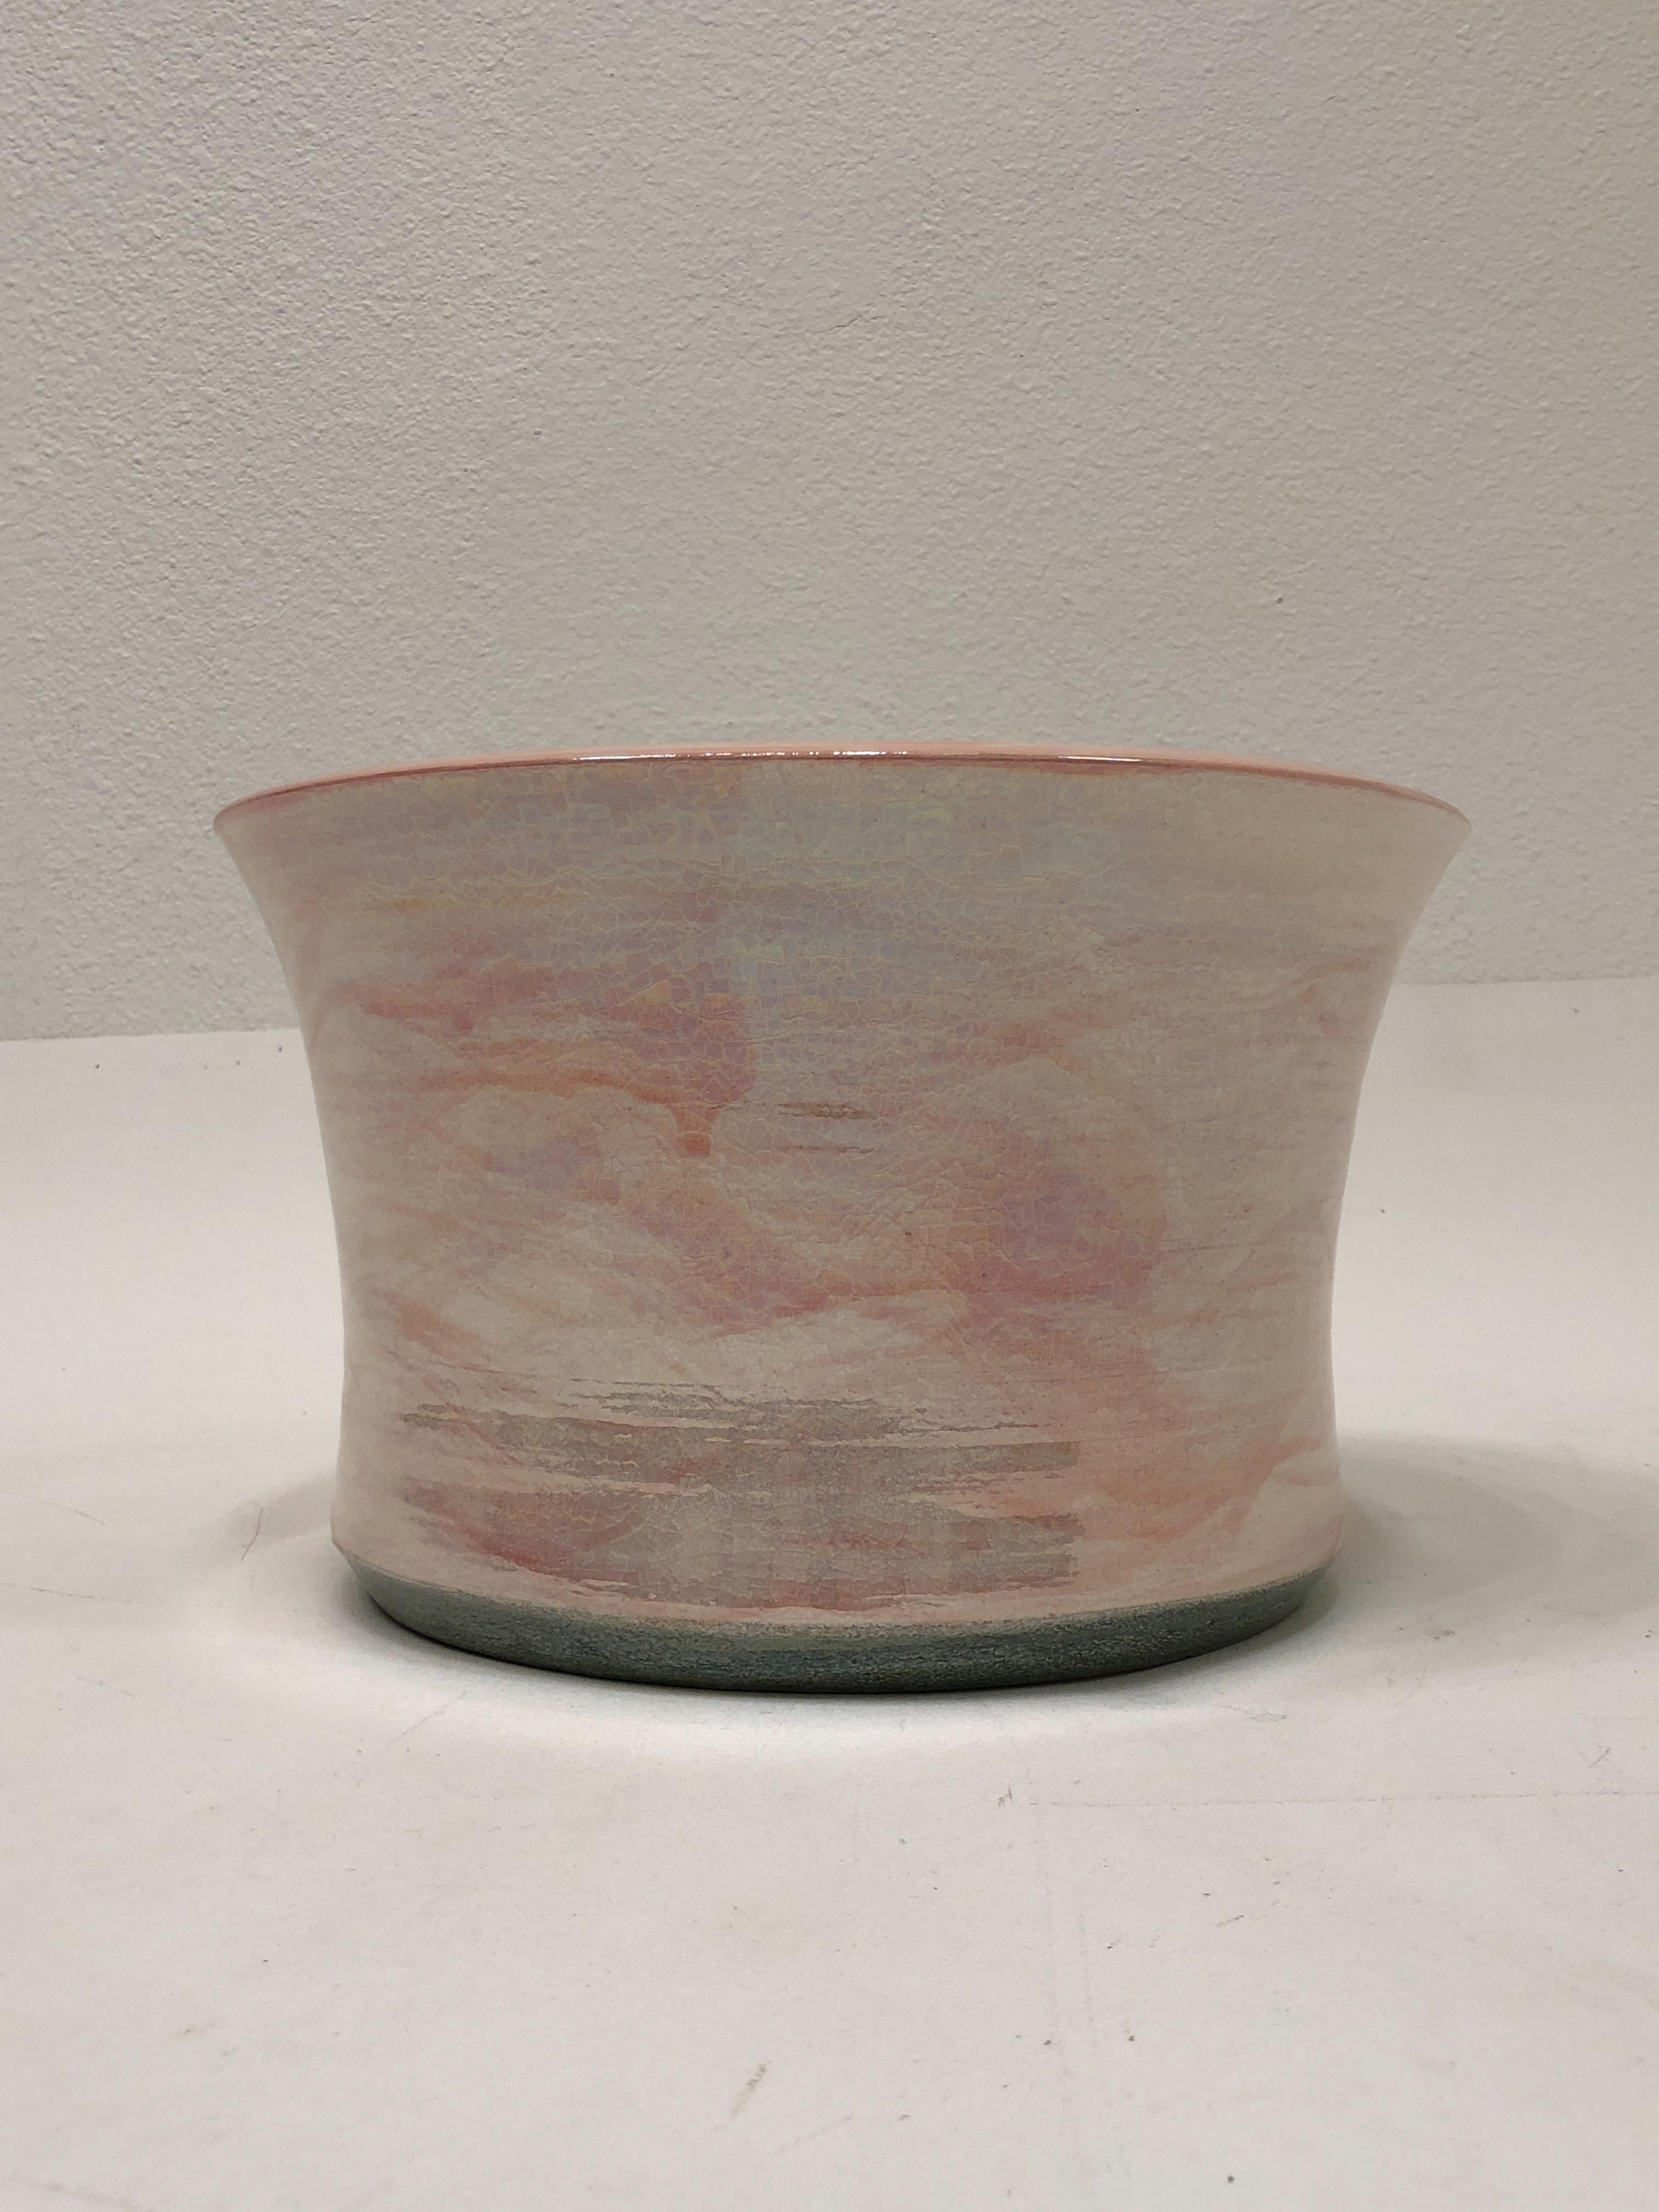 1980’s Studio ceramic cachepot by Gary McCloy for Steve Chase. 
Grate for orchids or indoor plants. 
The finish is a crackle high gloss glaze with brush strokes of pink. 
Hand signed McCoy and Stamped ‘Gary McCoy Exclusively for Steve